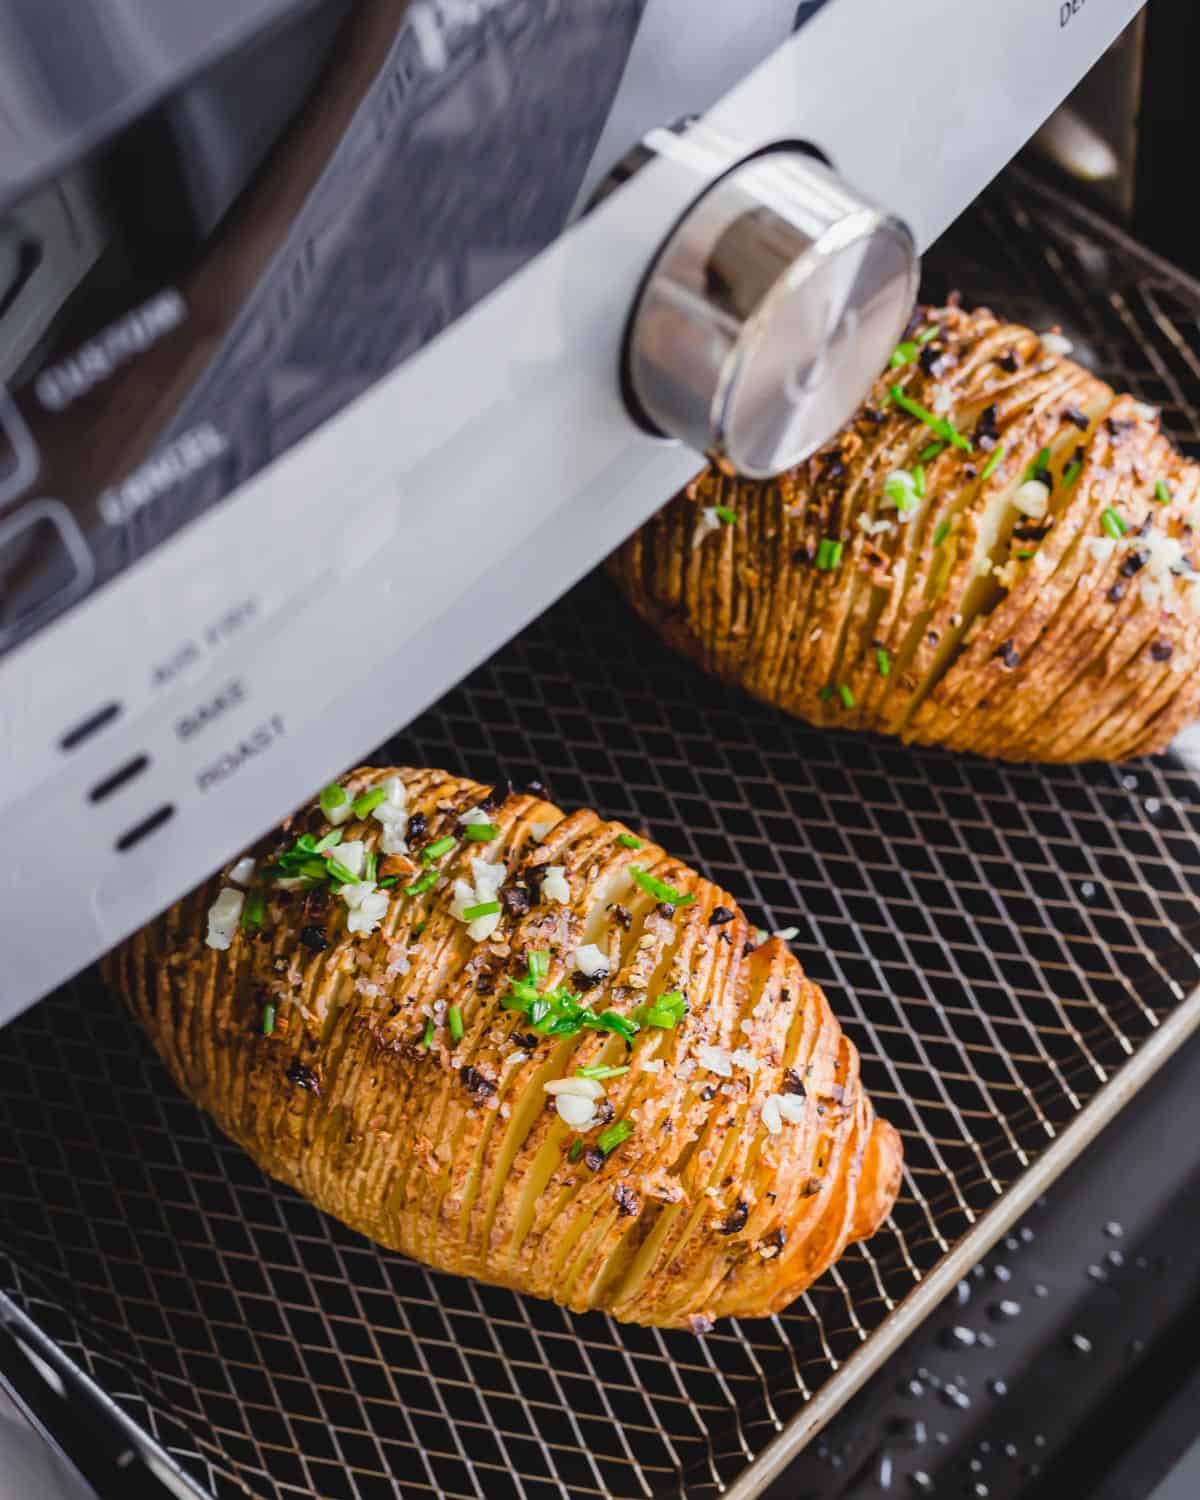 Hasselback white potatoes on an air fryer tray garnished with chives.